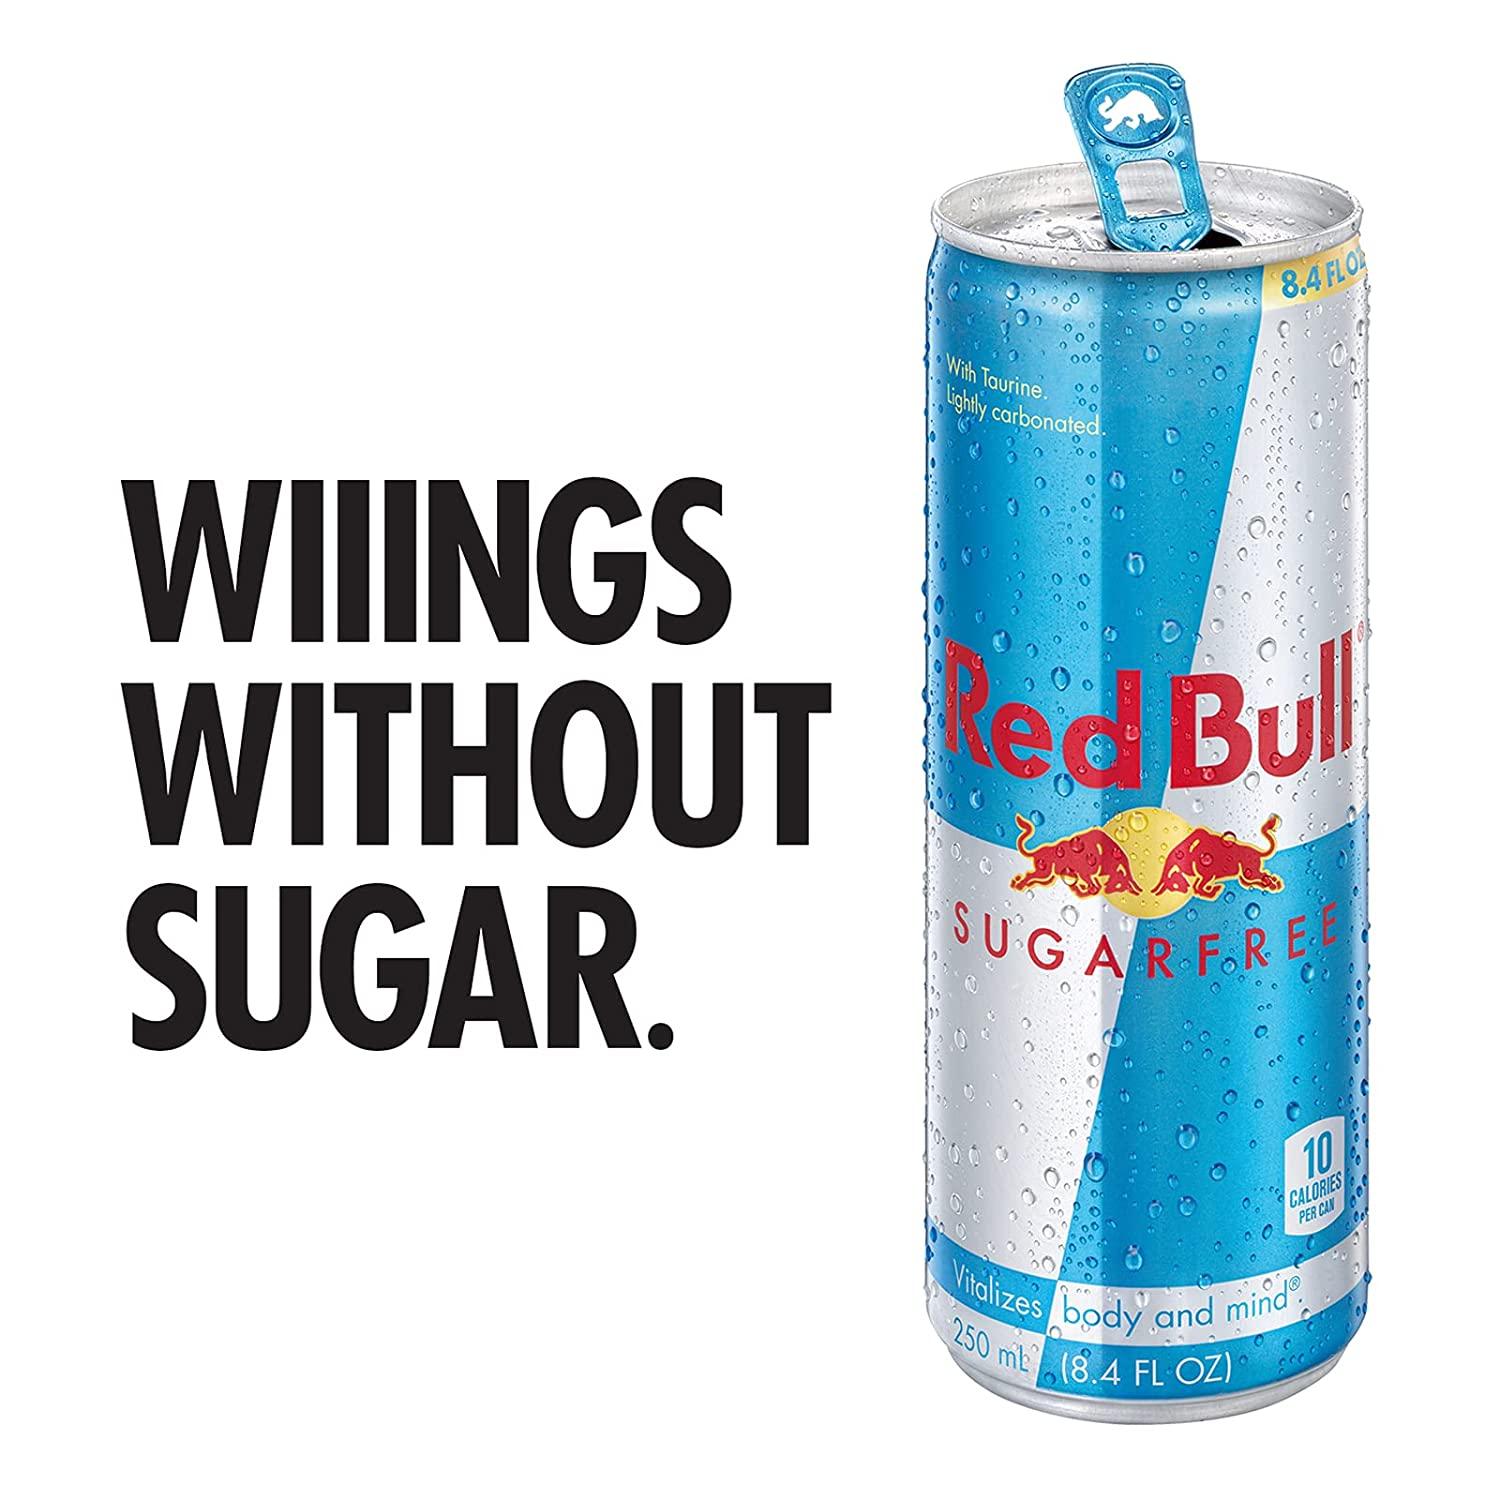 Red Bull Organics Simply Cola: Review 